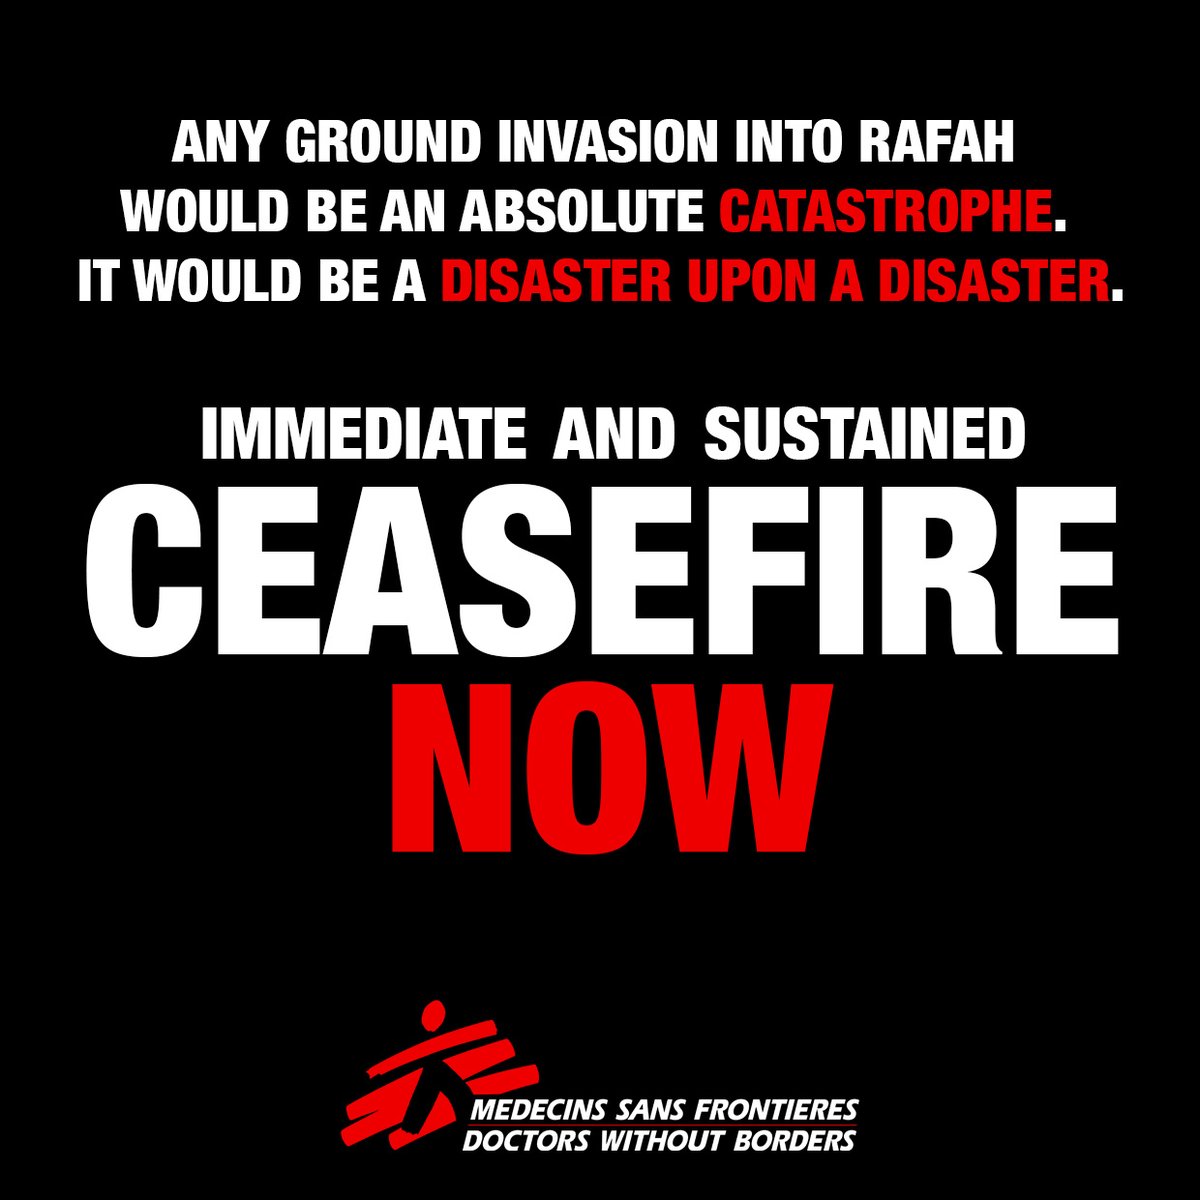 “Any ground invasion into #Rafah would be an absolute catastrophe. It doesn’t bear thinking about. It would be a disaster upon a disaster.” @Chris_lockyear Immediate and sustained ceasefire now. #Gaza